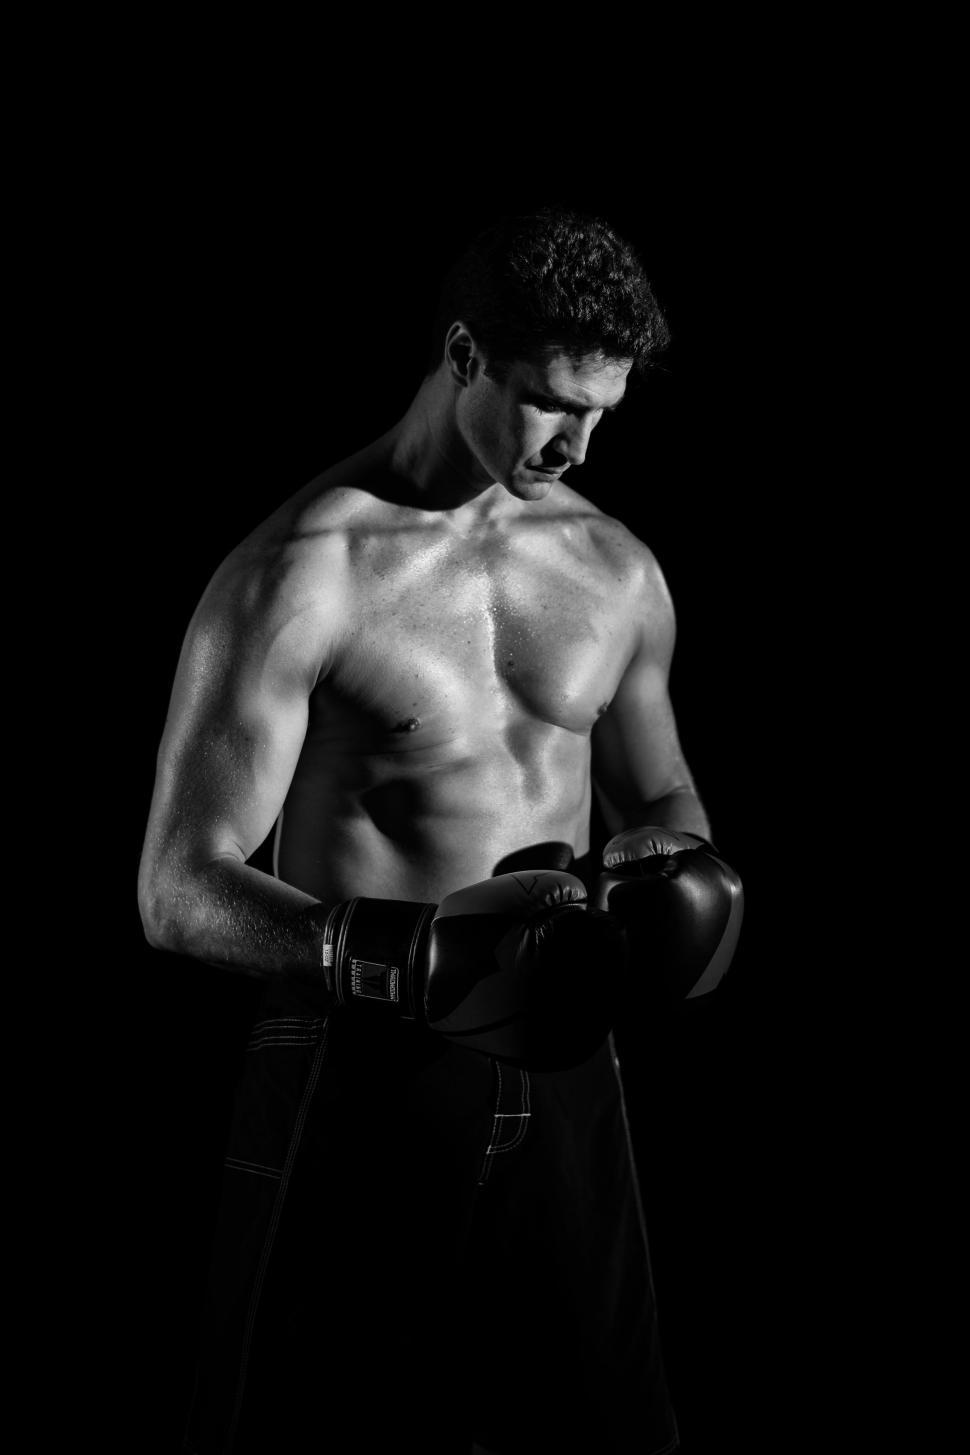 Free Image of Boxer with boxing gloves - black background  